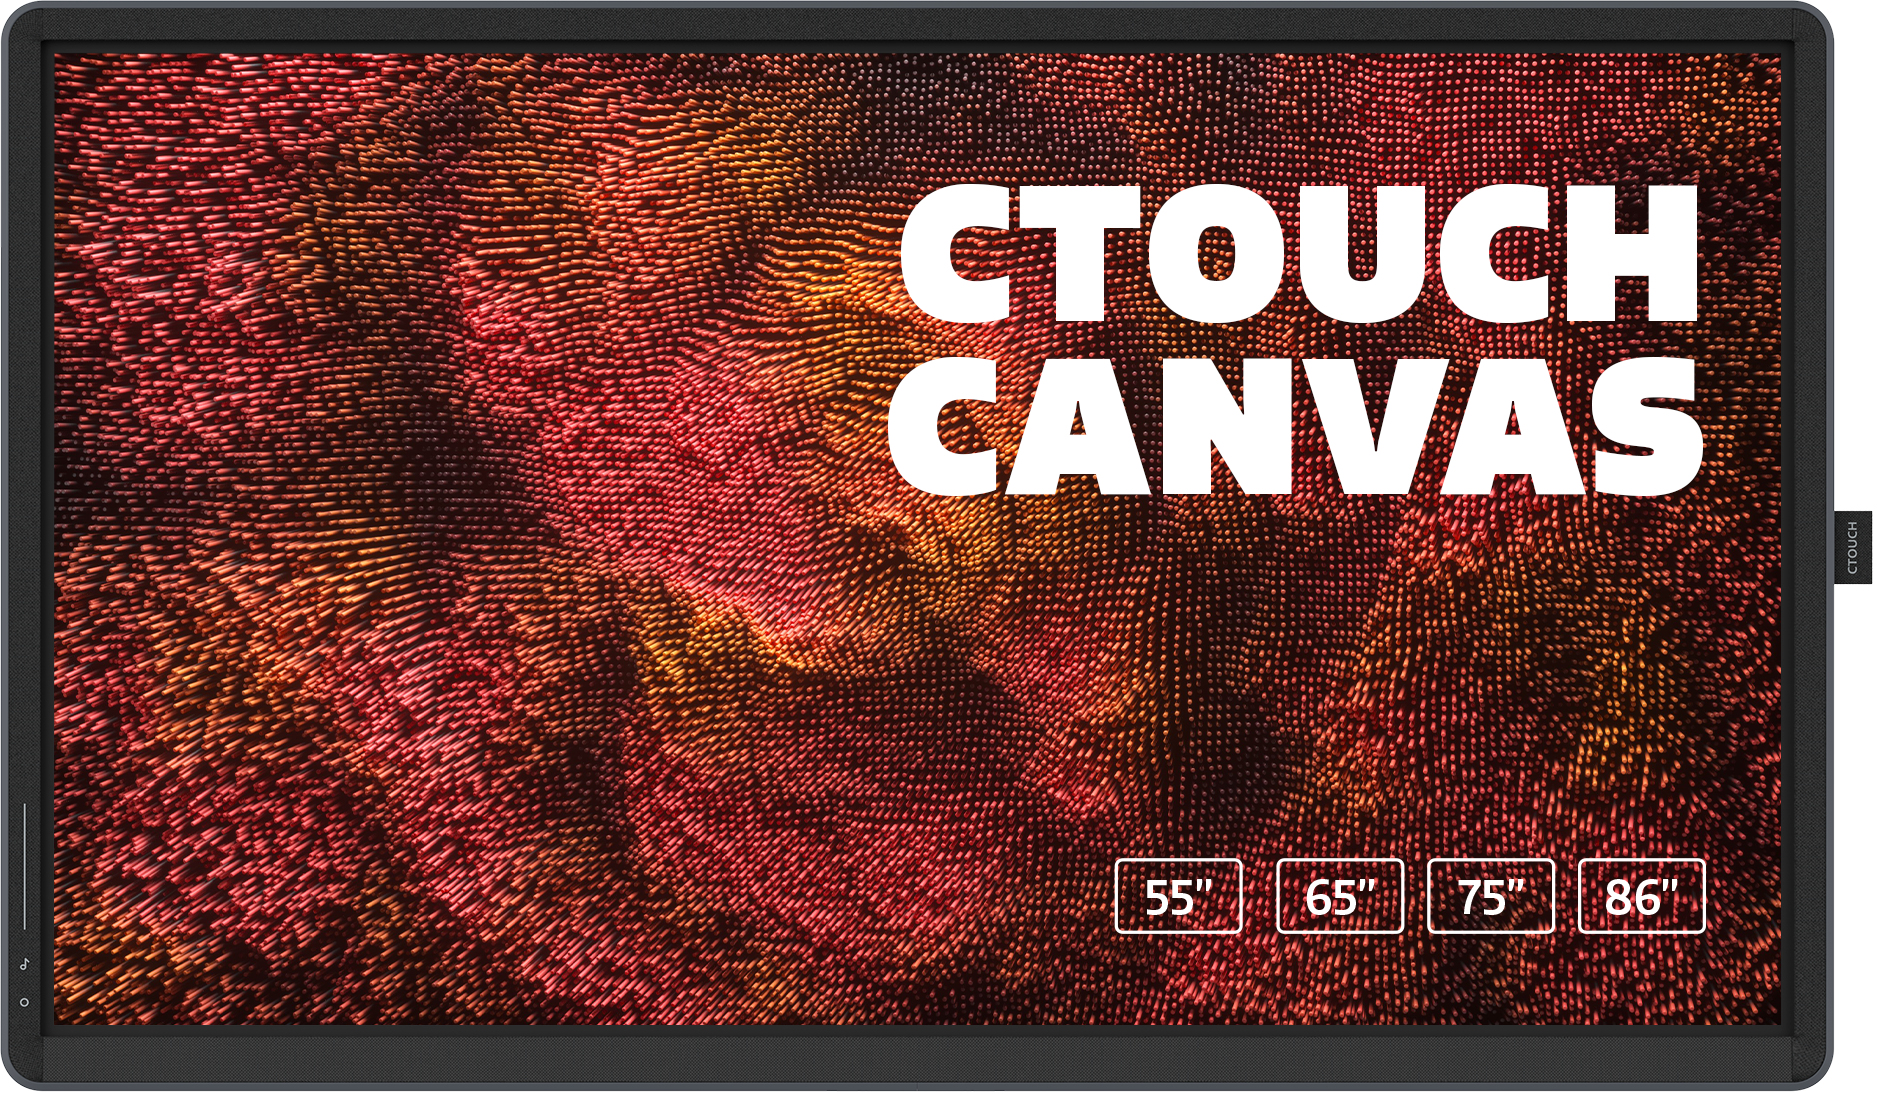 CTOUCH Canvas - 86 Zoll - 350 cd/m² - Ultra-HD - 4K - 3840x2160 - NO-OS-Betriebssystem - 20 Punkt - Touch Display - Midnight Grey